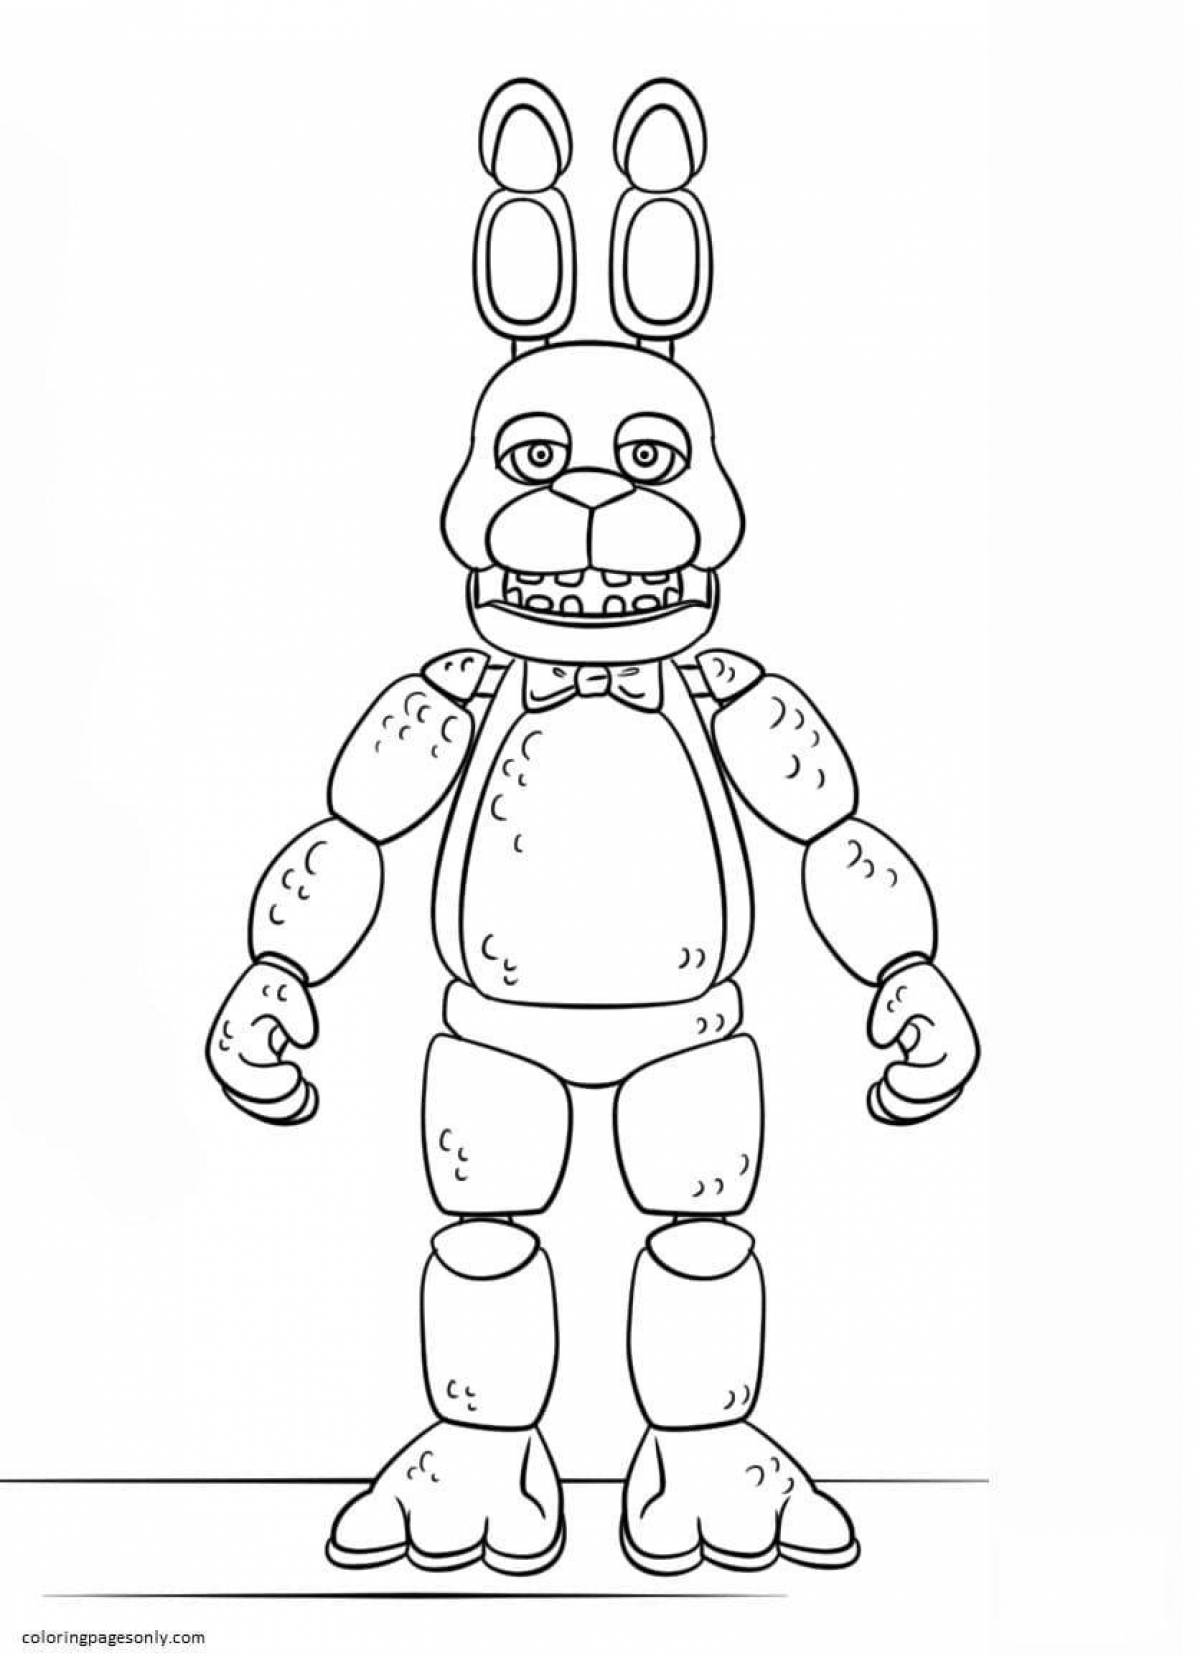 Exciting fnaf coloring